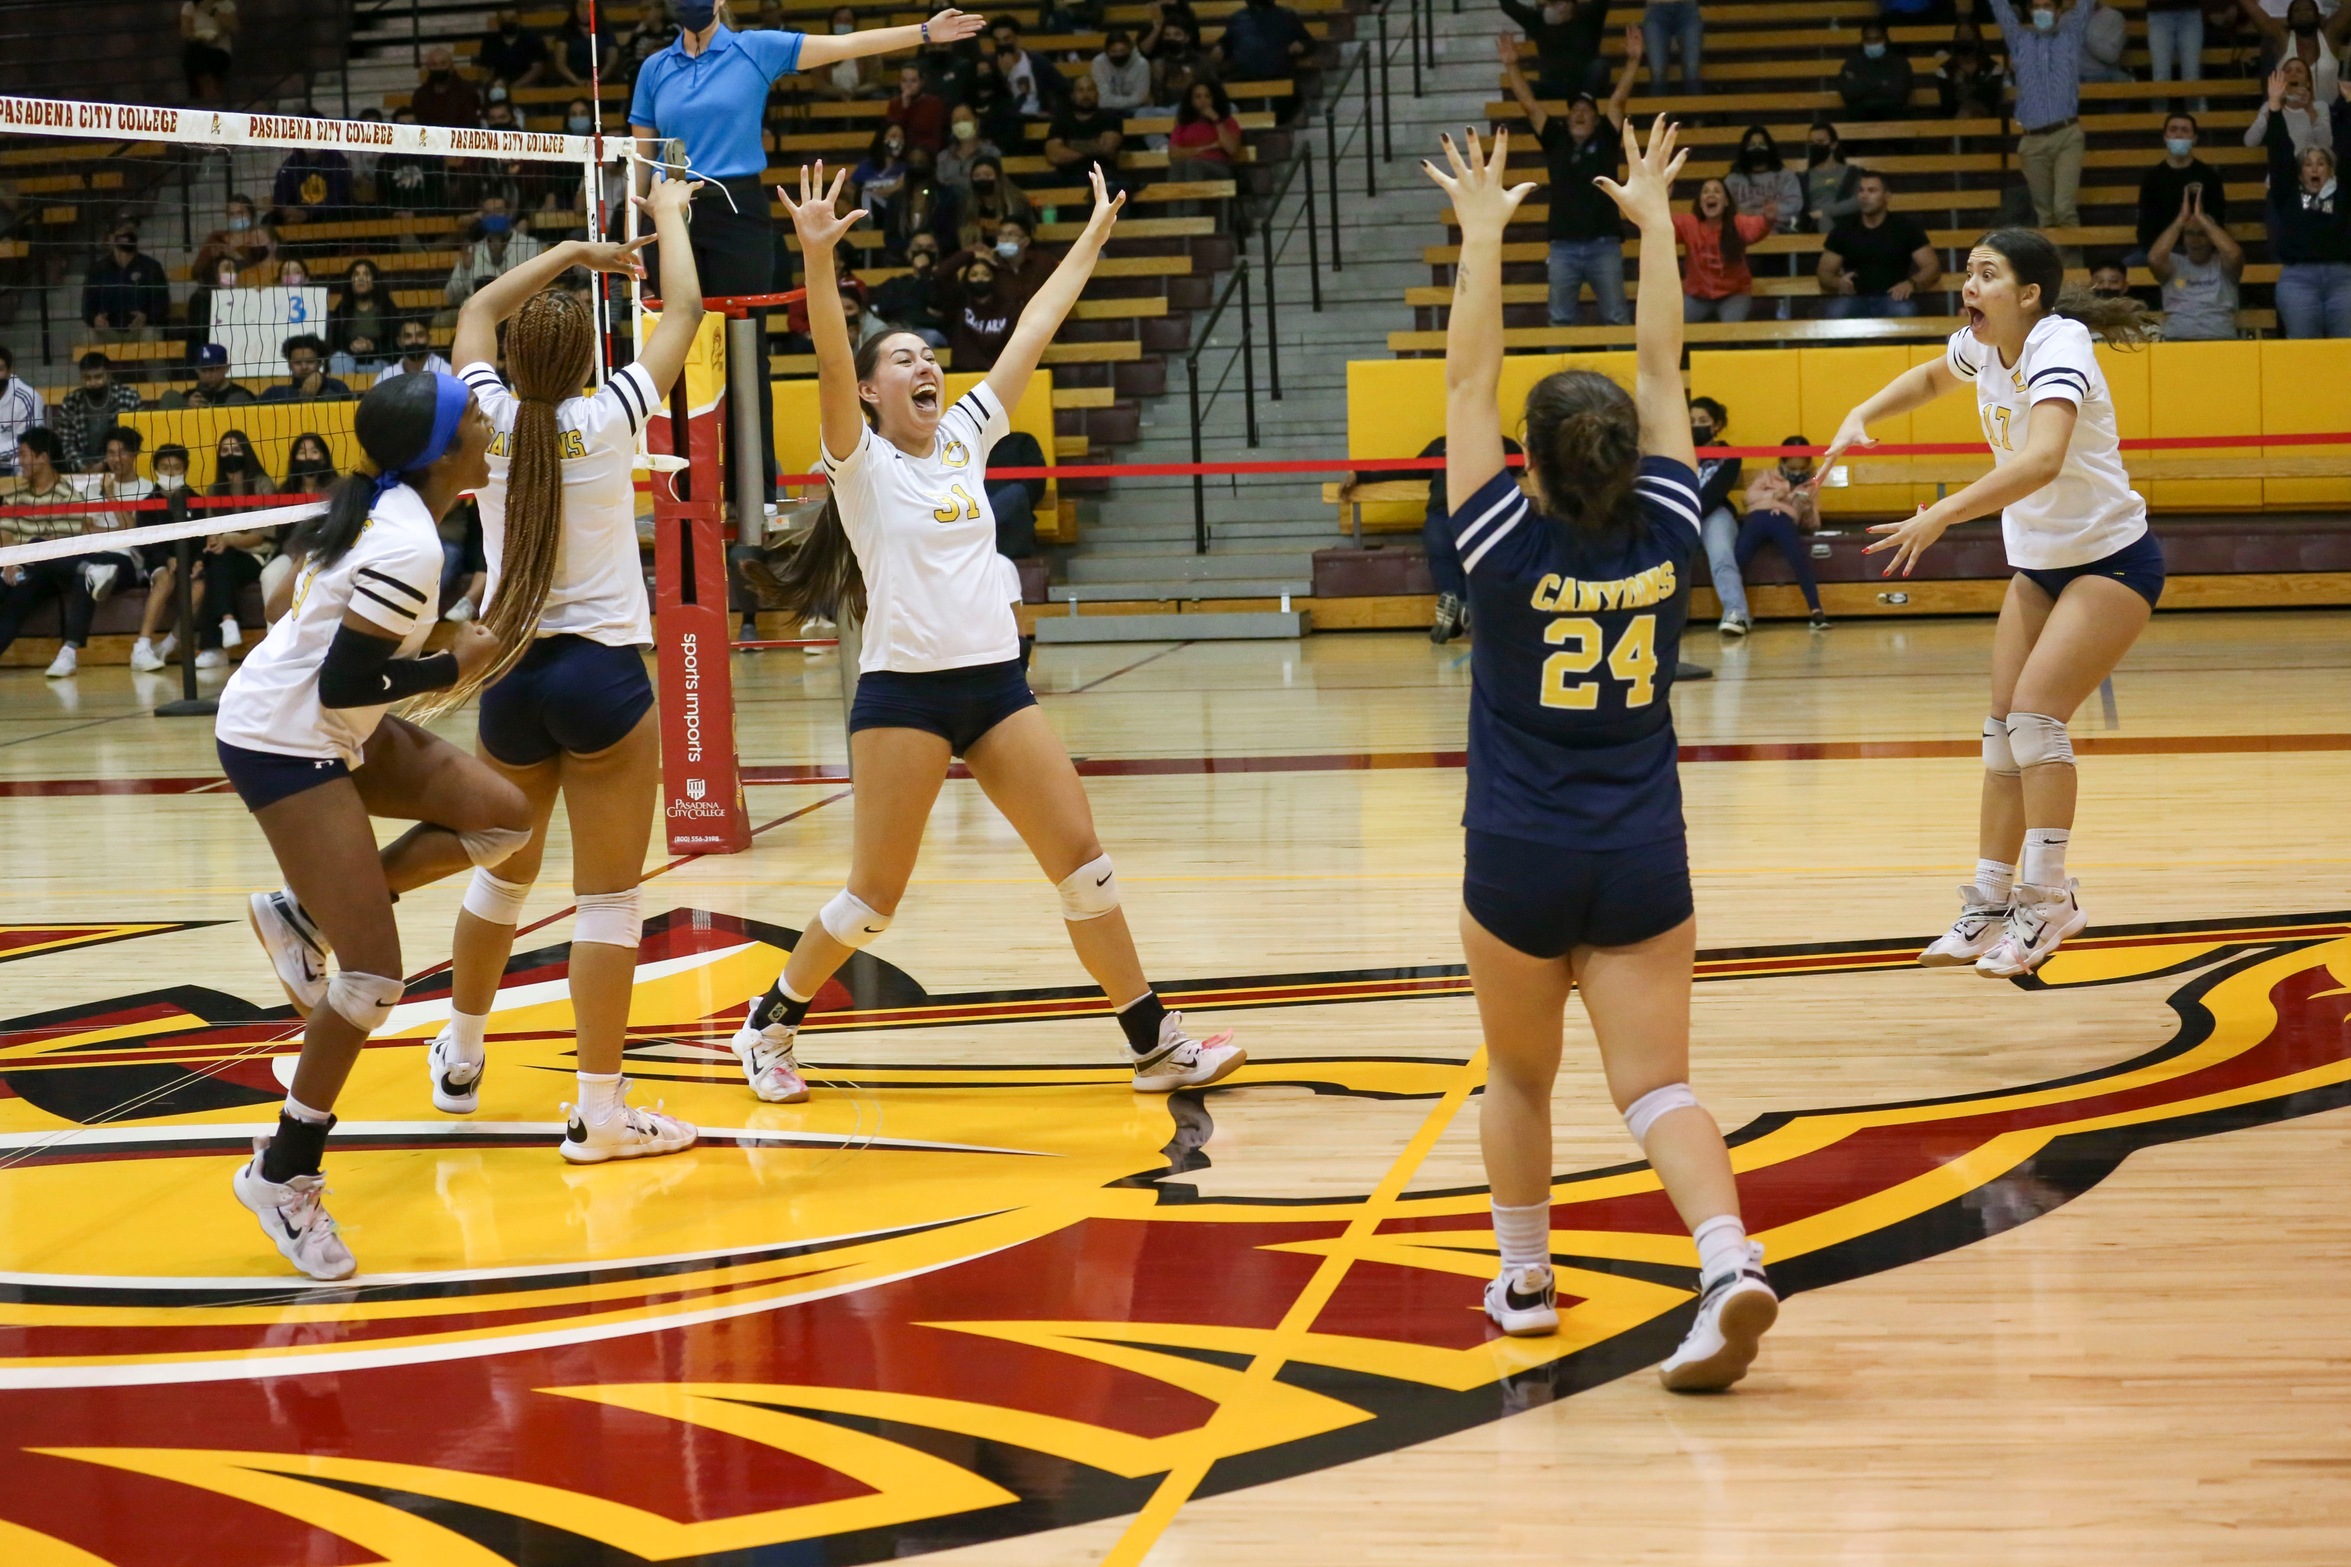 No. 15 seed College of the Canyons upset No. 2 Pasadena City College 3-0 (25-20, 25-16, 25-22) on Tuesday to advance to the second round of the CCCCAA Southern California Regional Playoffs. The win was the ninth straight for the Cougars and snapped PCC's 20-match streak. —Jesse Muñoz/COC Sports Information